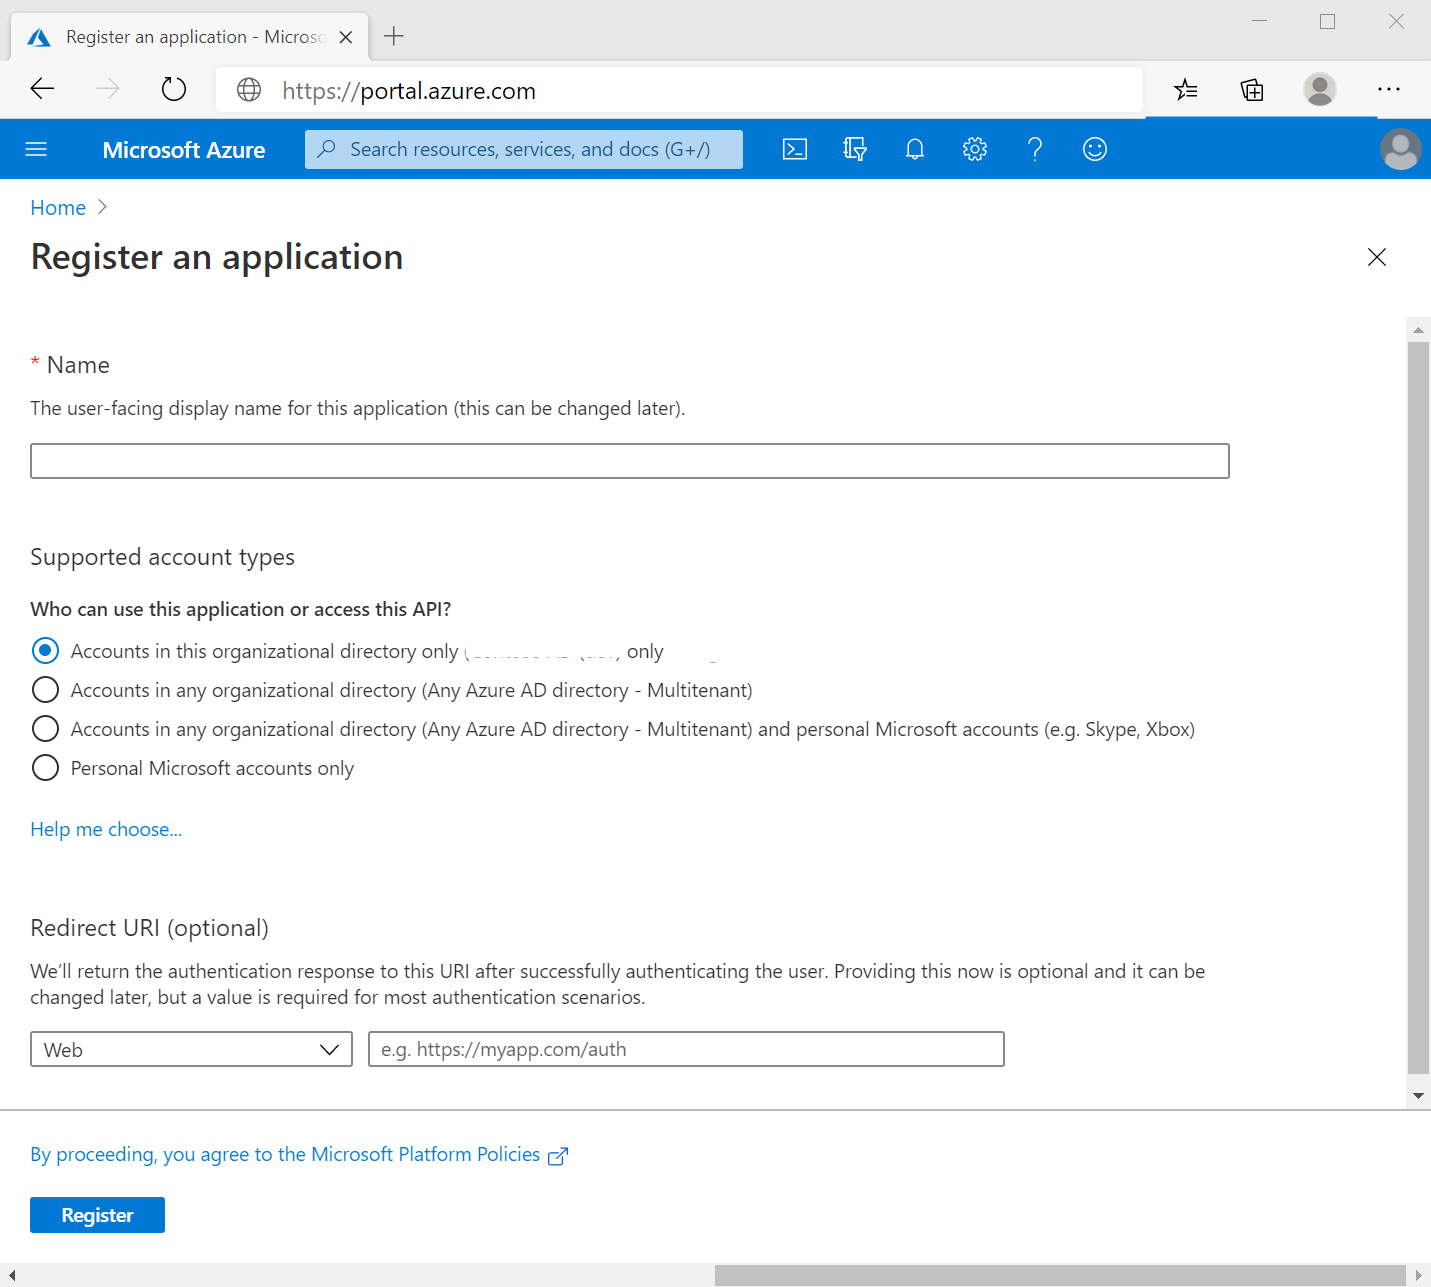 Microsoft Azure's Register an Application page.